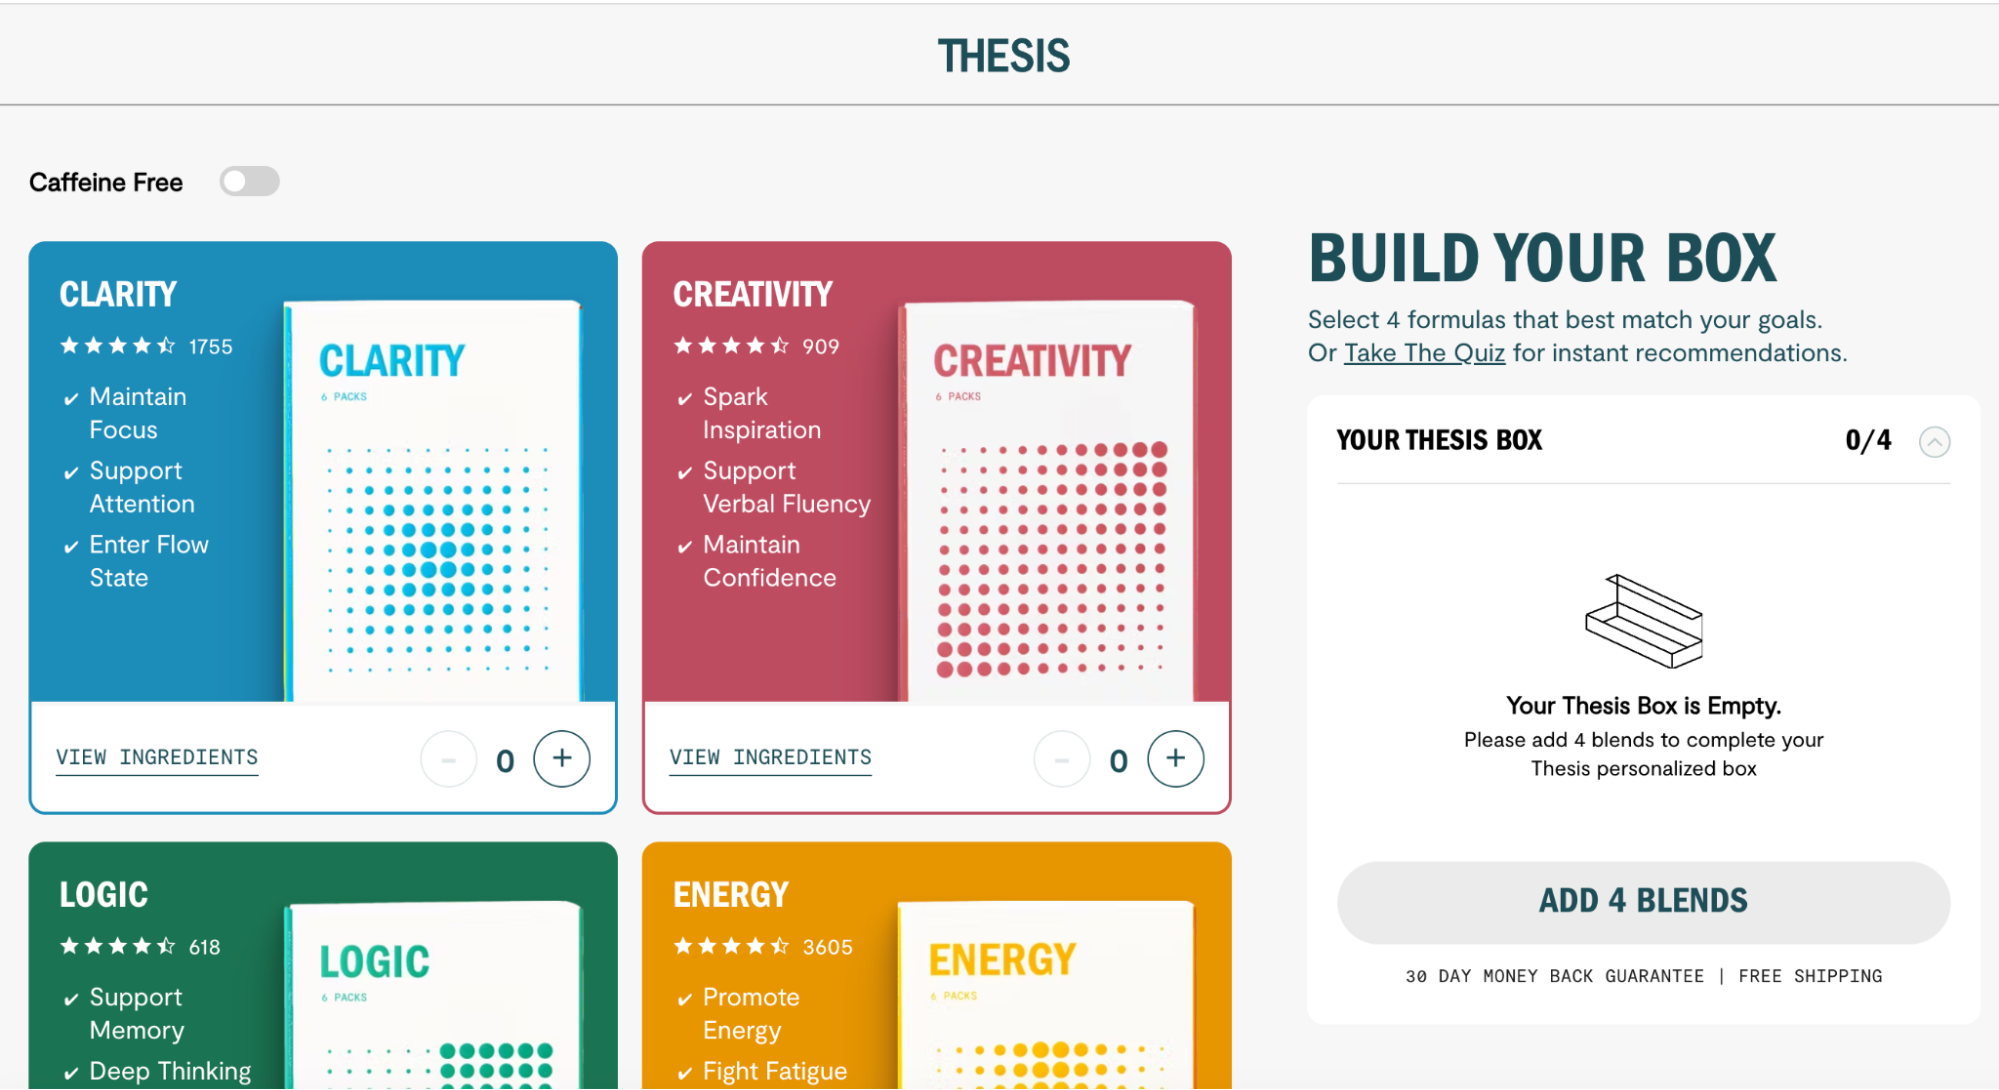 Screenshot of the build-your-box webpage from supplement brand Thesis.